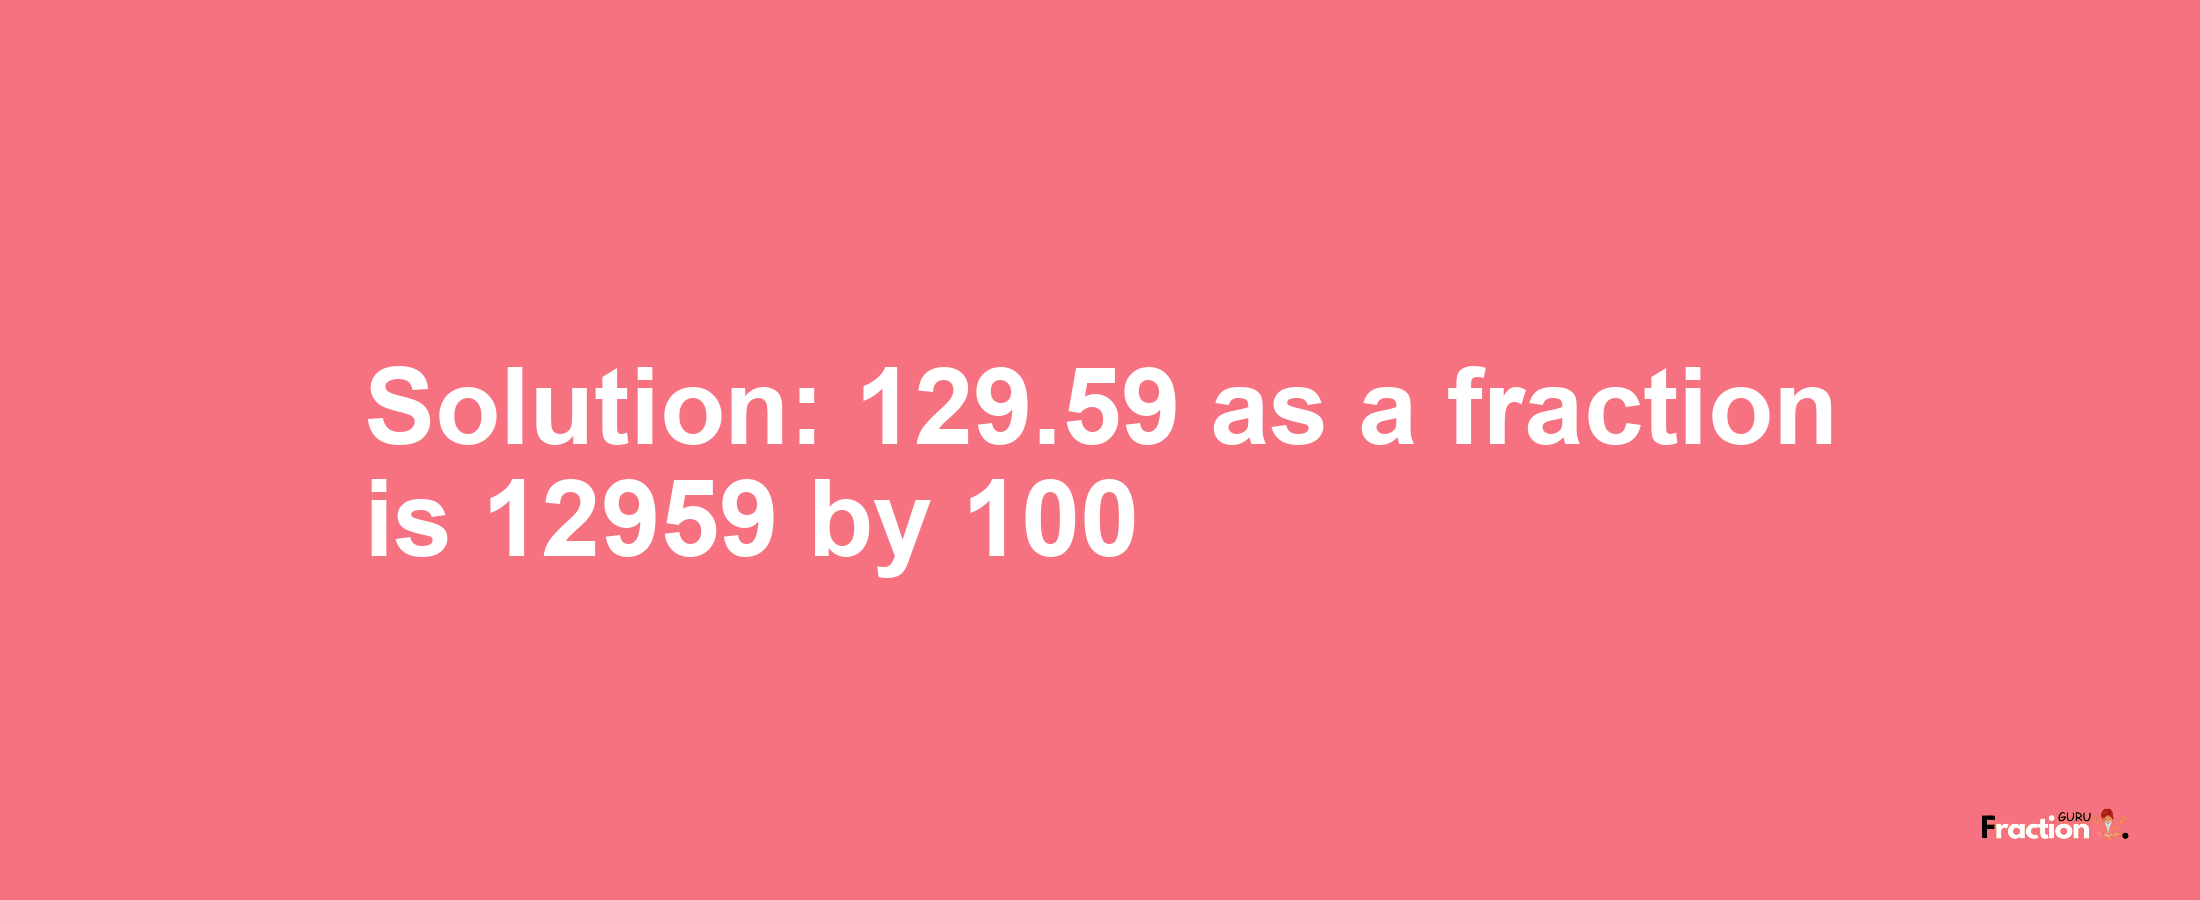 Solution:129.59 as a fraction is 12959/100